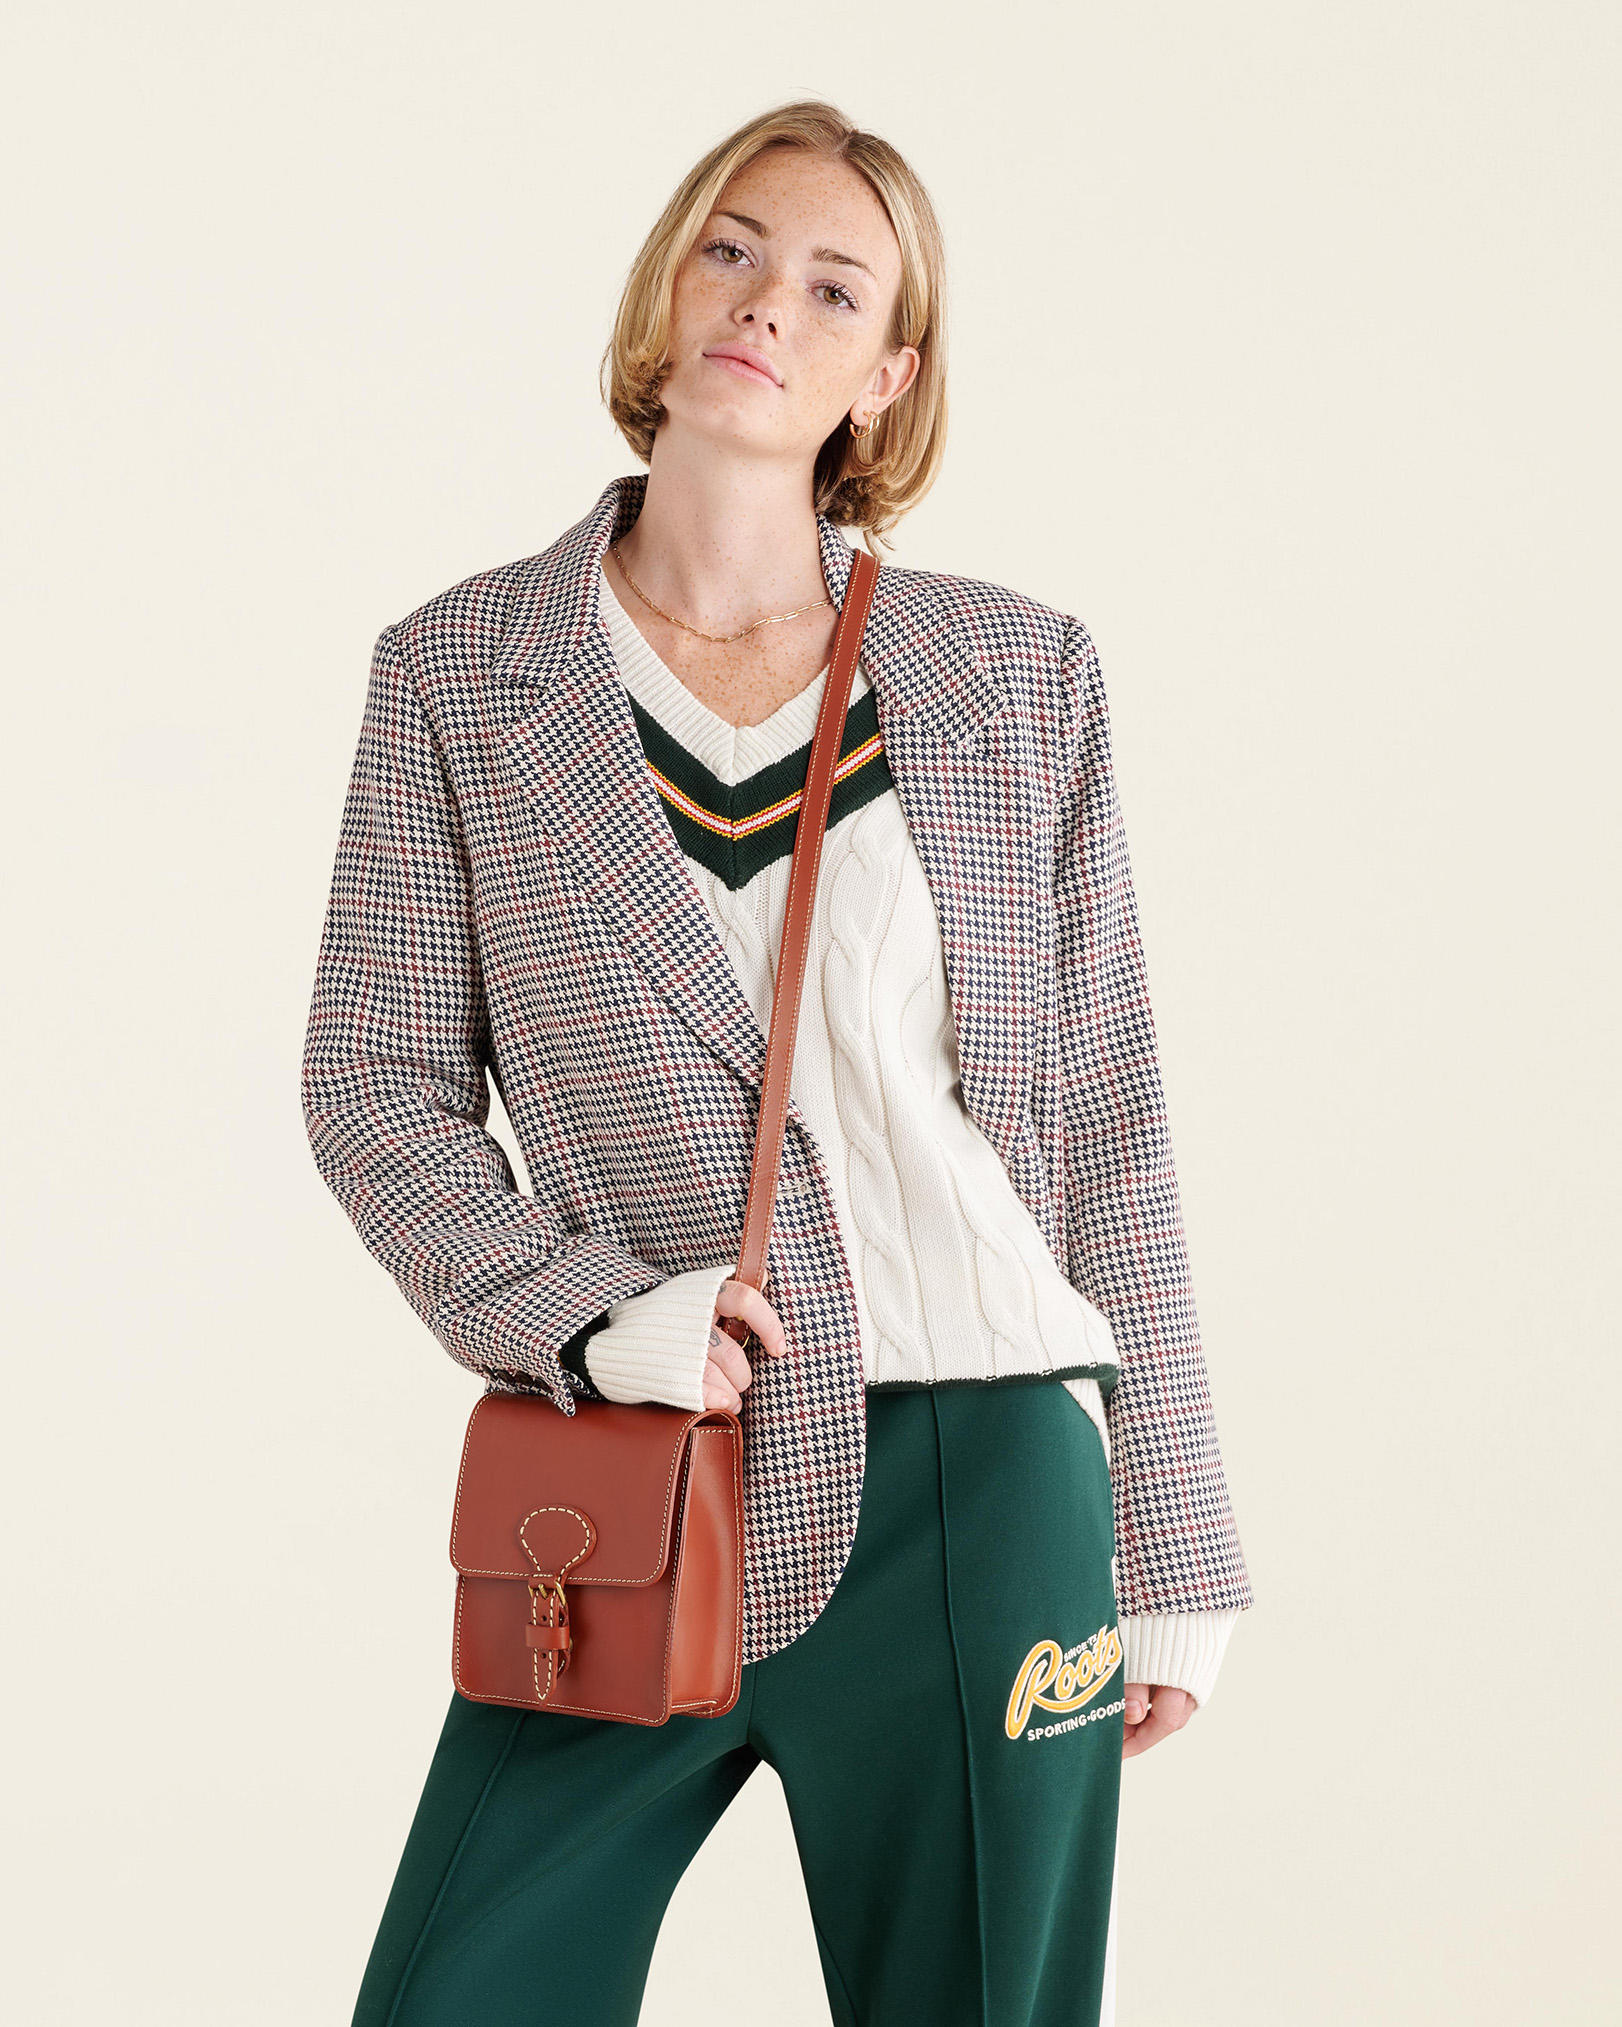 Roots Rossland Check Blazer Jacket in Assorted